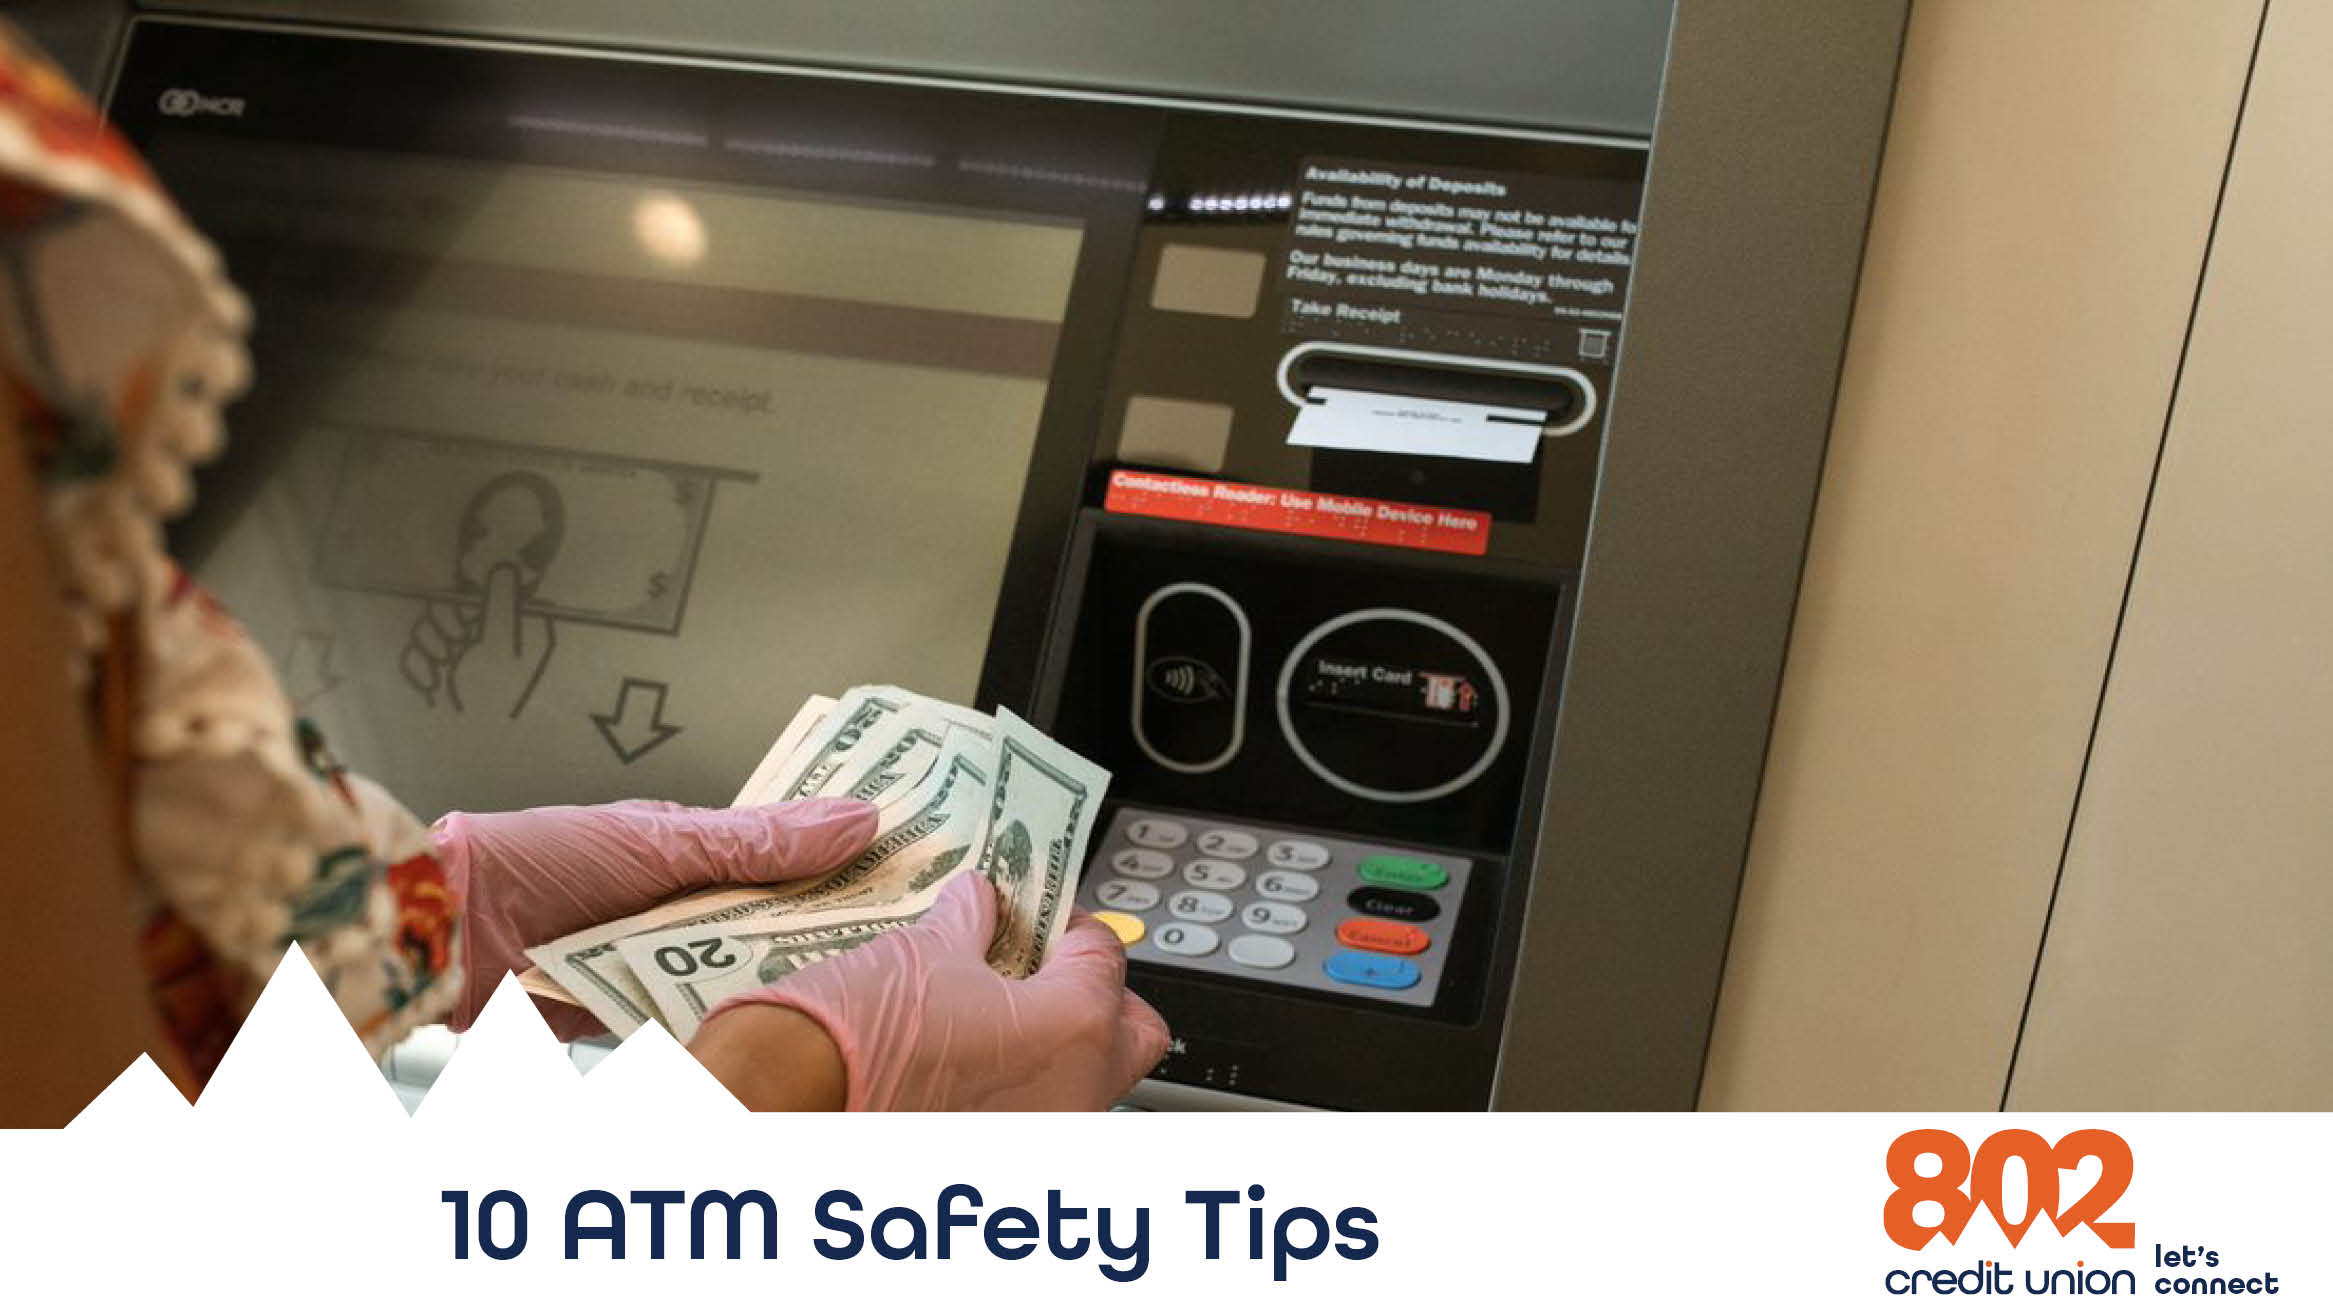 Image of a person at ant ATM with money in their hands.